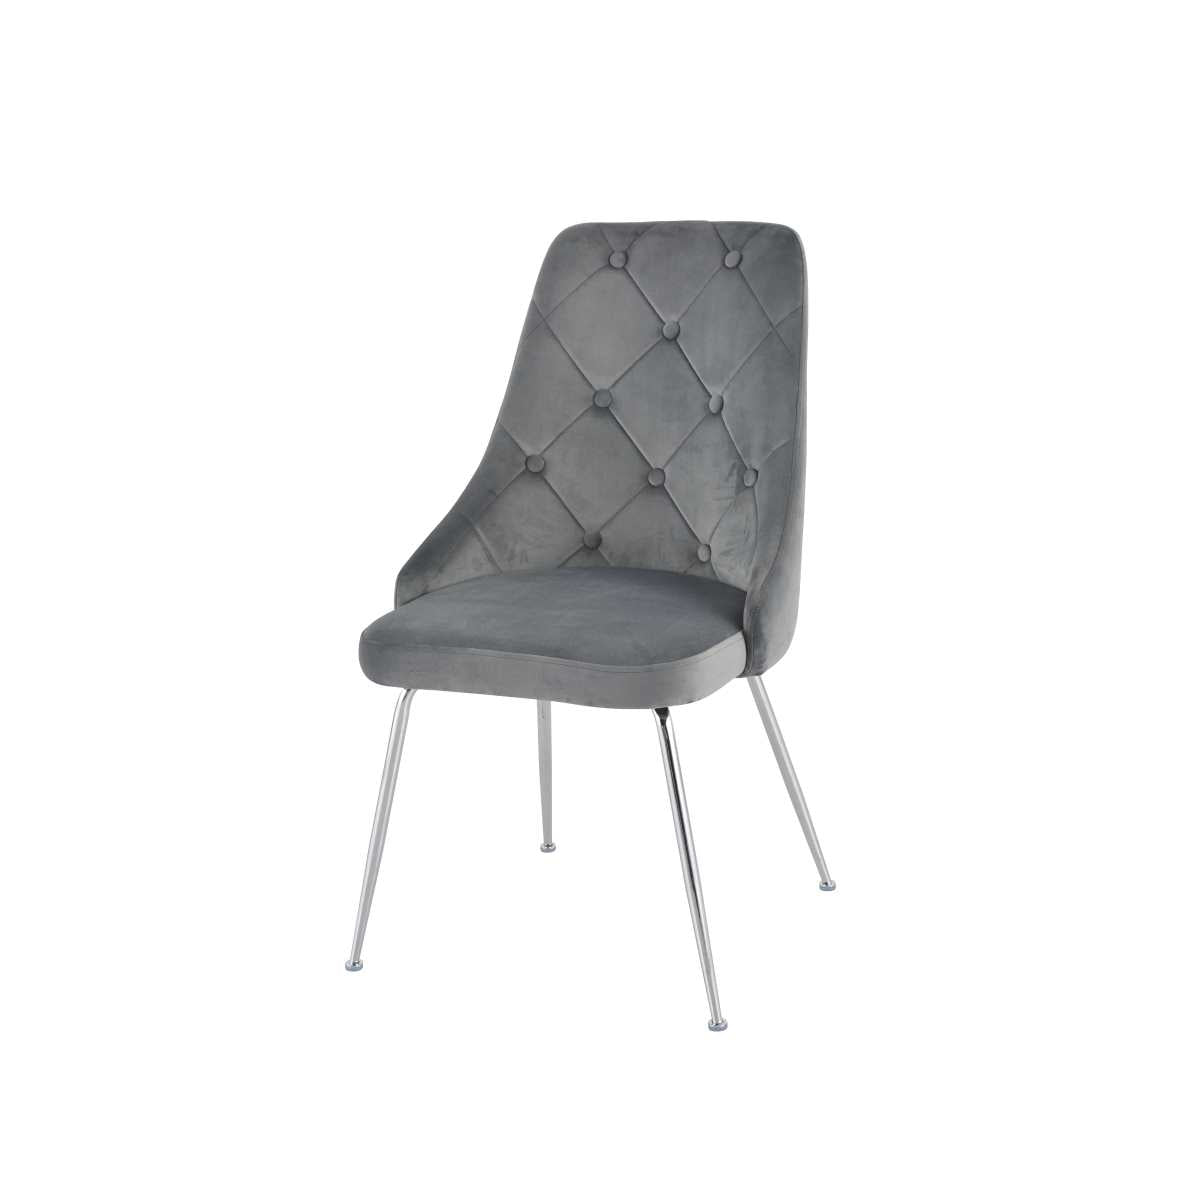 Plumeria Chairs Set Of 2 Grey With Chrome Legs 1321